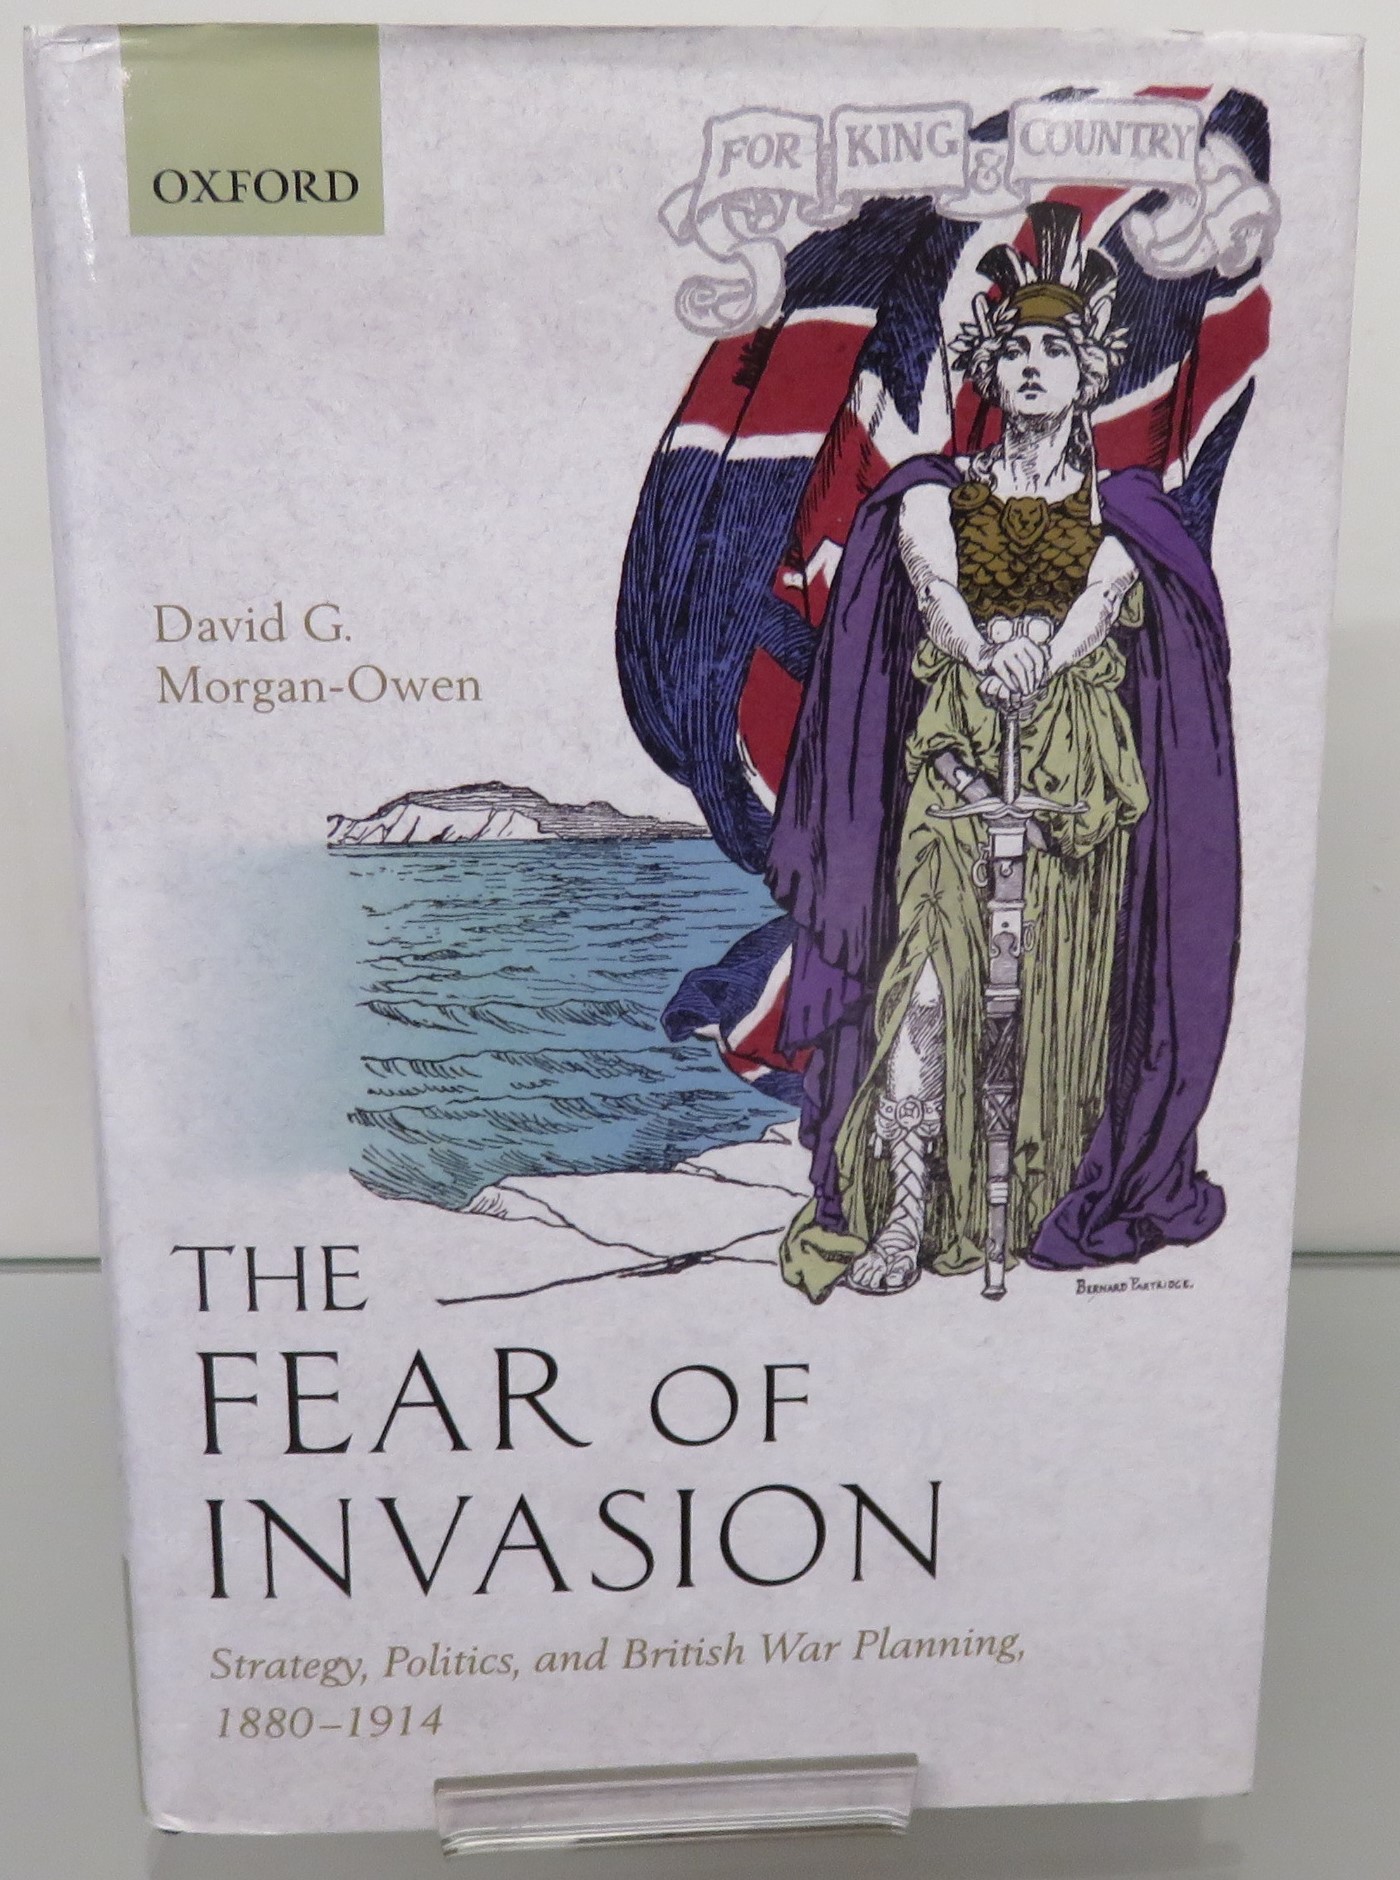 The Fear of Invasion: Strategy, Politics, and British War Planning, 1880-1914